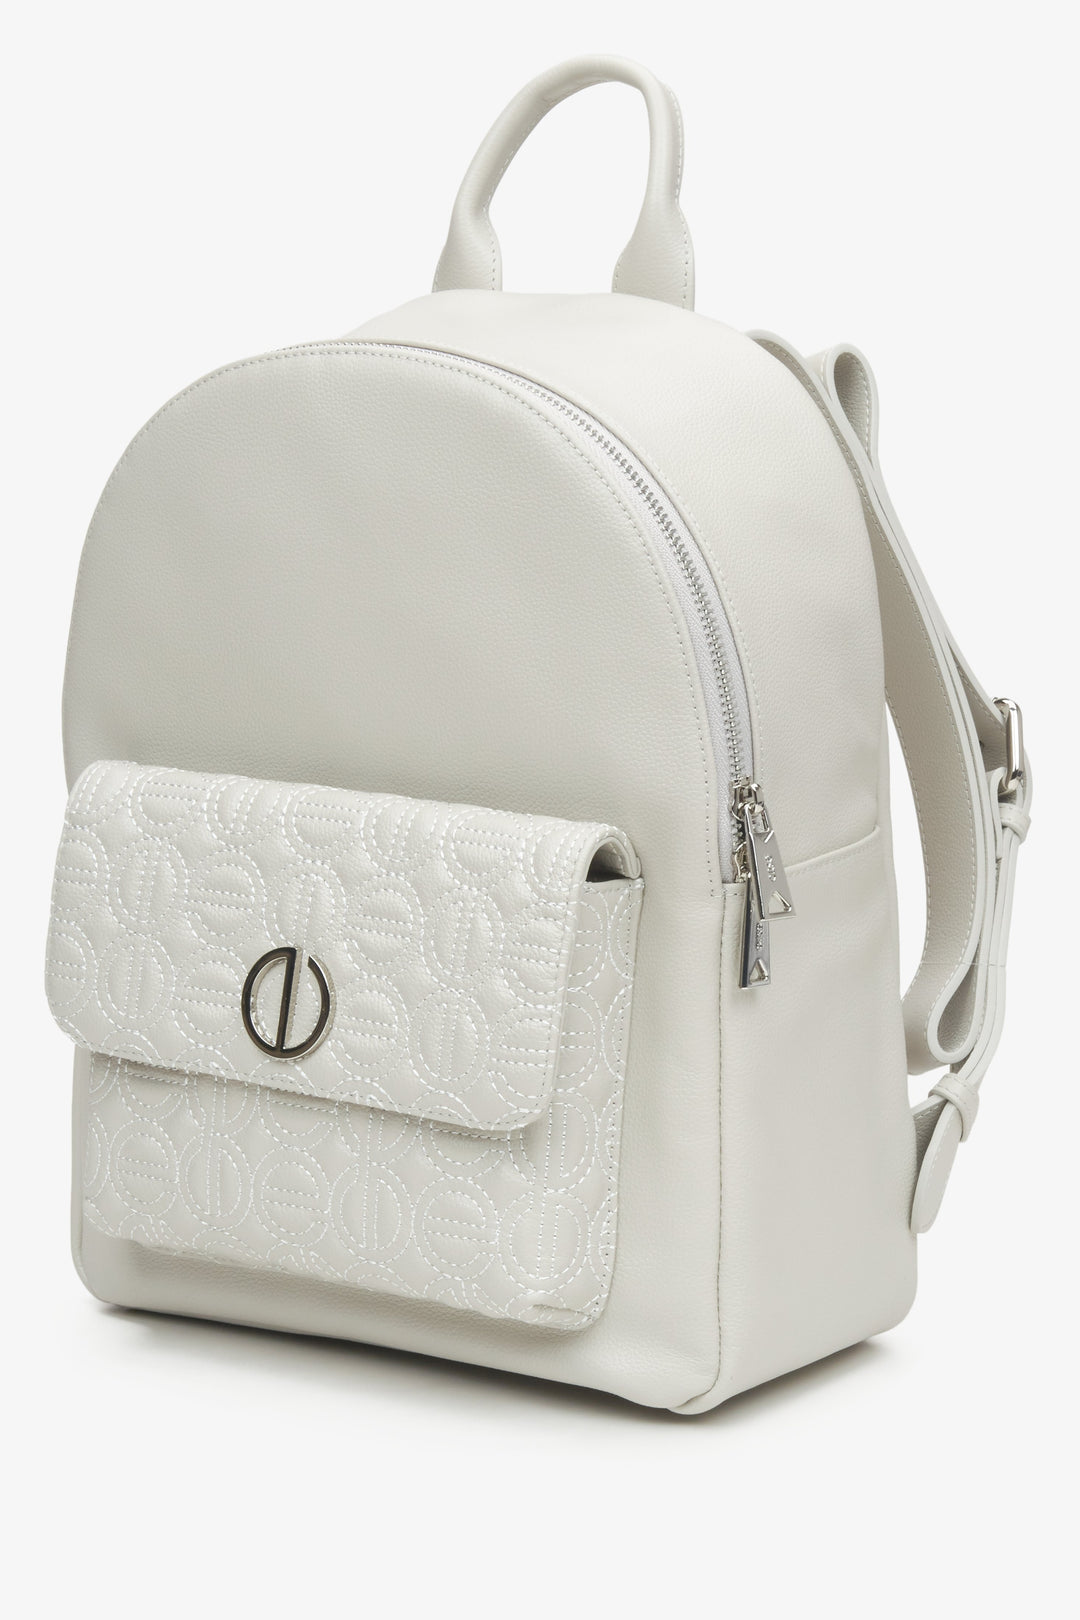 Women's light grey leather backpack by Estro.